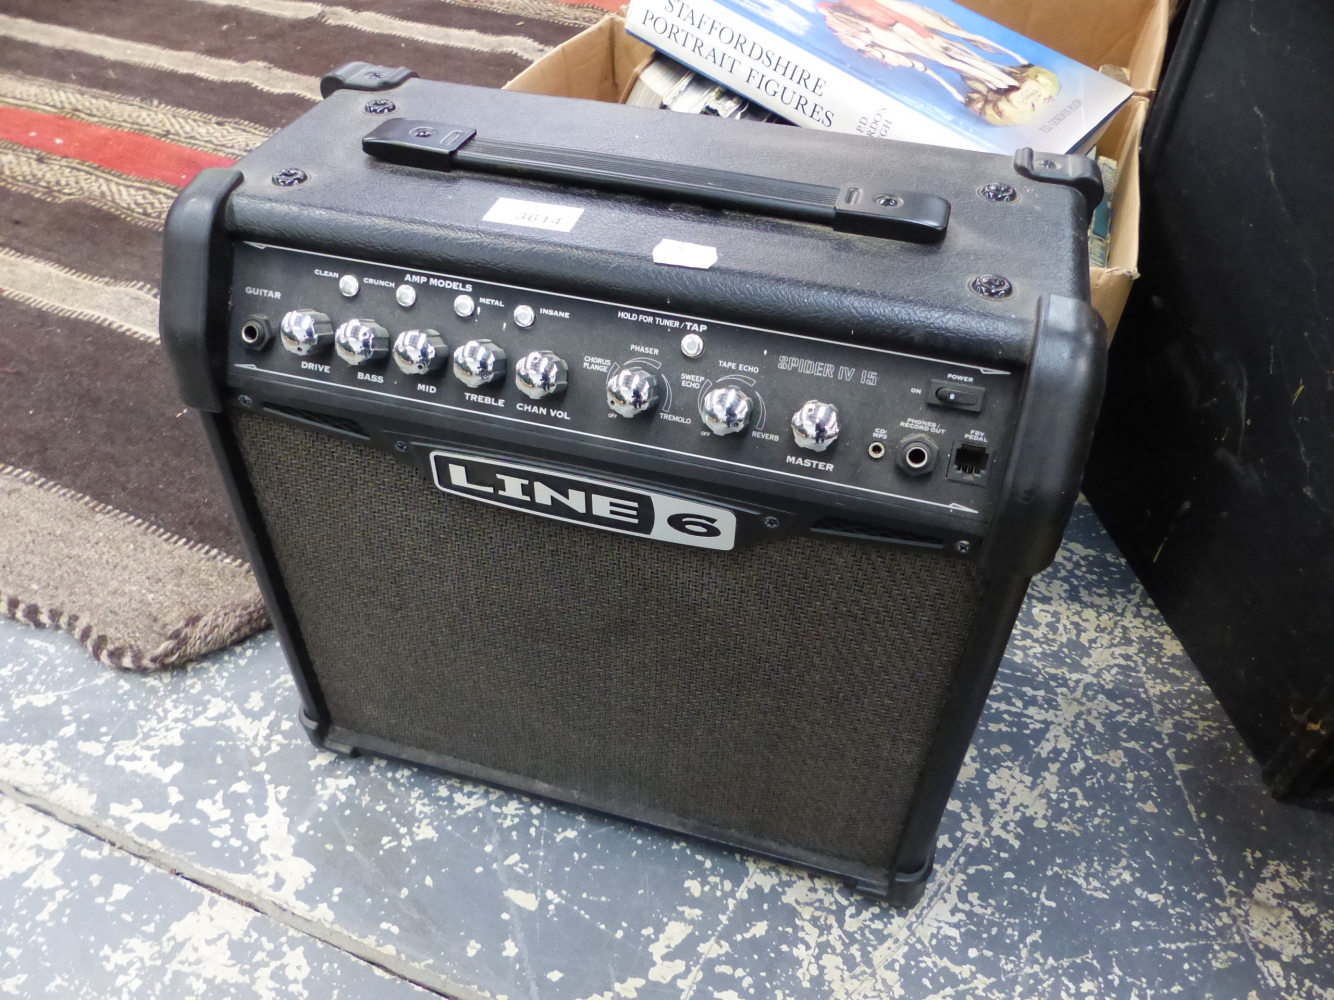 A SMALL "LINE 6" AMPLIFIER.